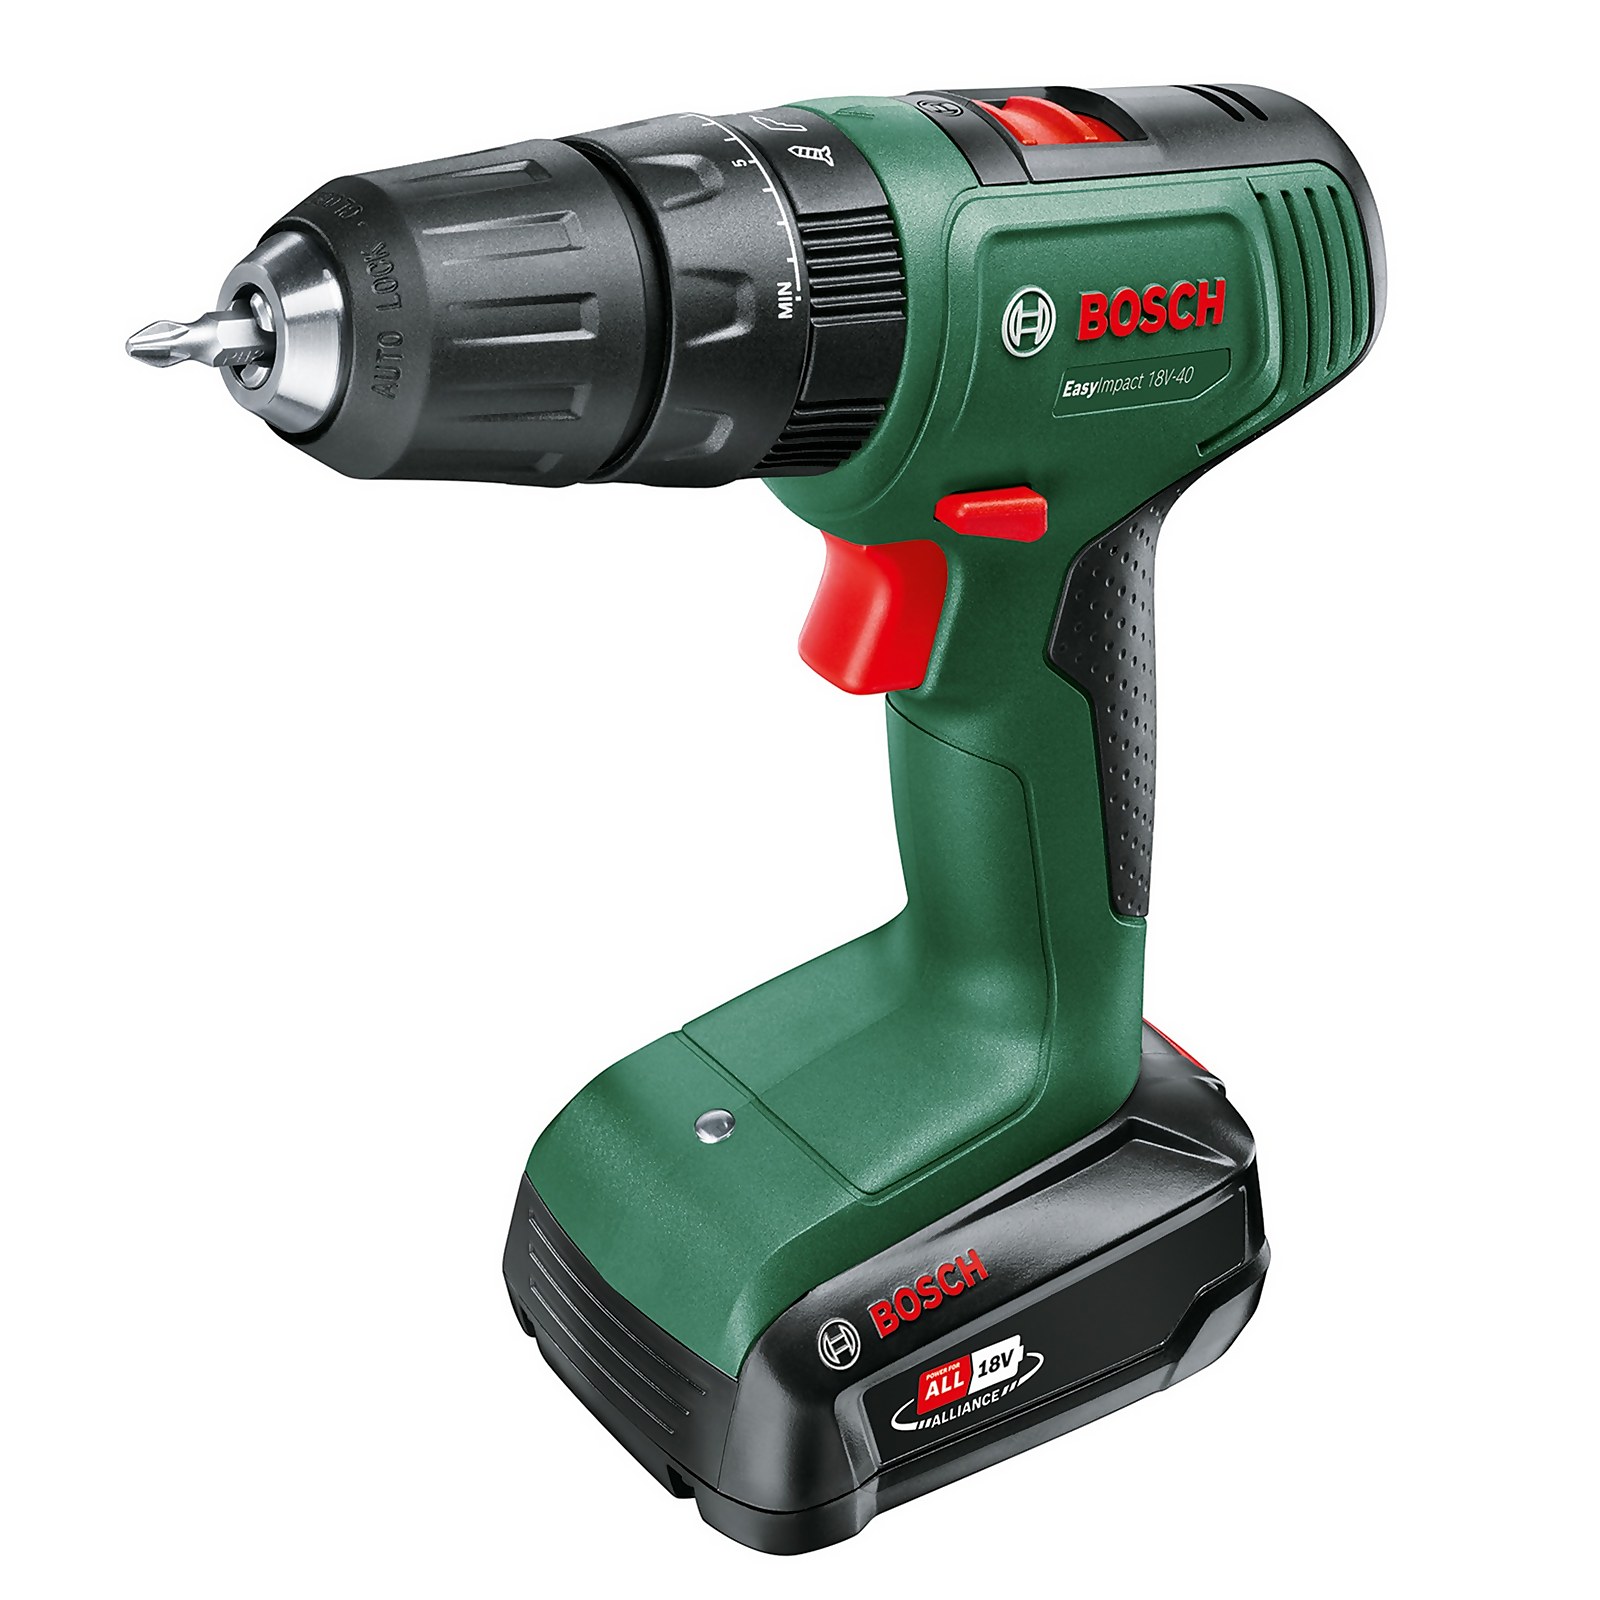 Photo of Bosch Easyimpact 18v-40 Combi Drill With 1 X 1.5ah Battery & Charger